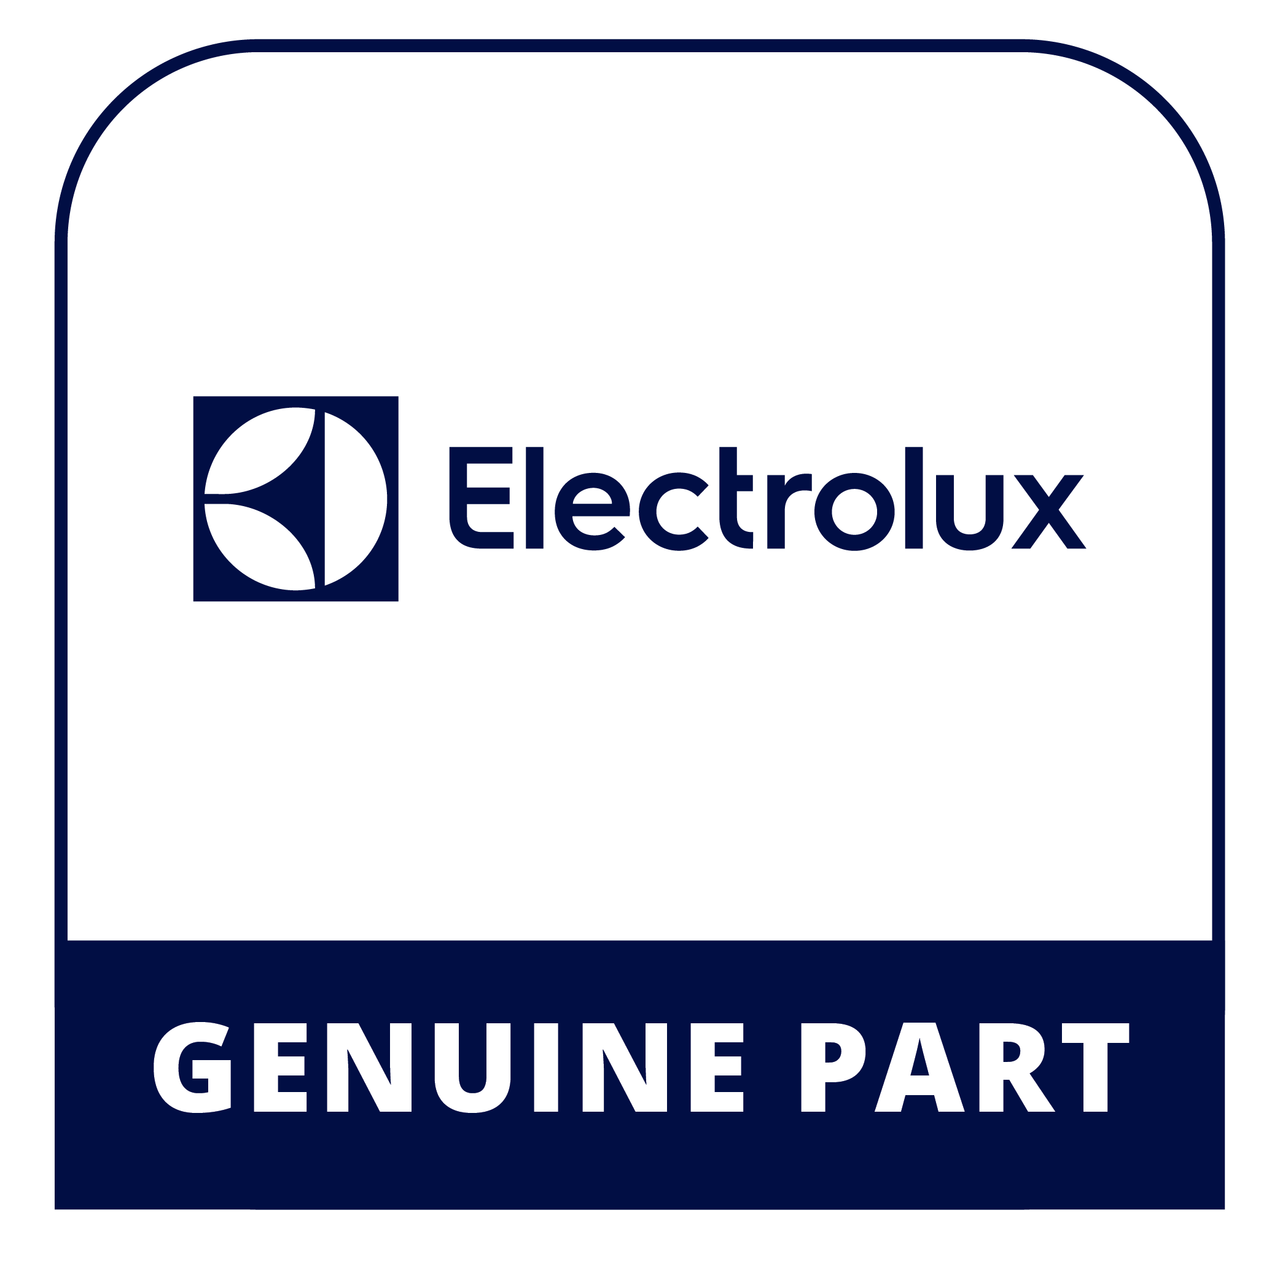 Frigidaire - Electrolux 139902501 Quick Start Guide - Genuine Electrolux Part